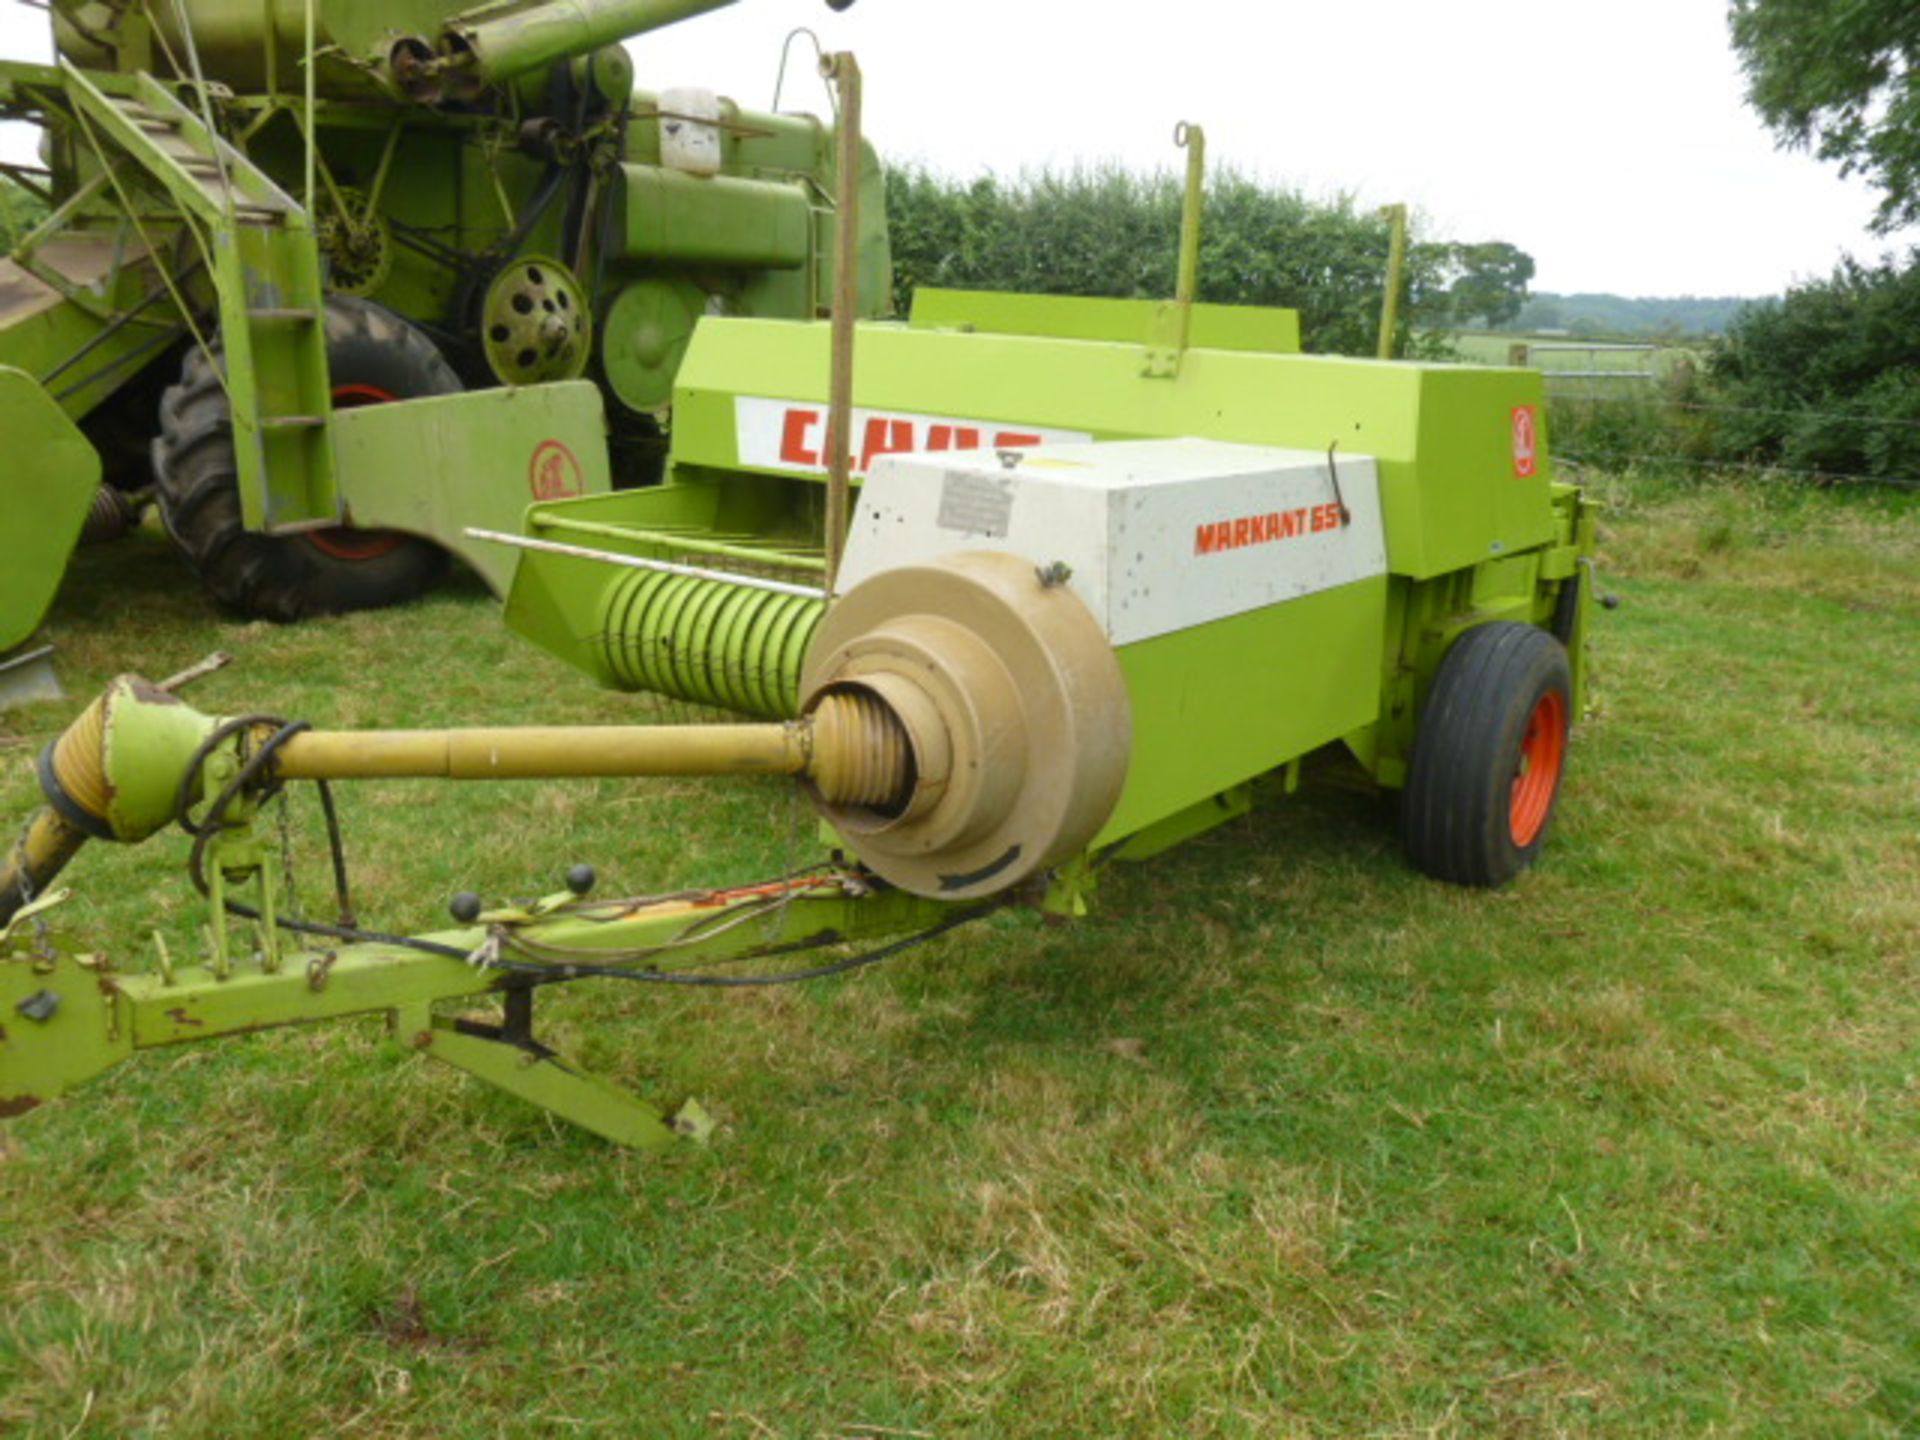 CLAAS MARKANT 65 BALER (VGC) ONE OWNER FROM NEW - Image 2 of 4